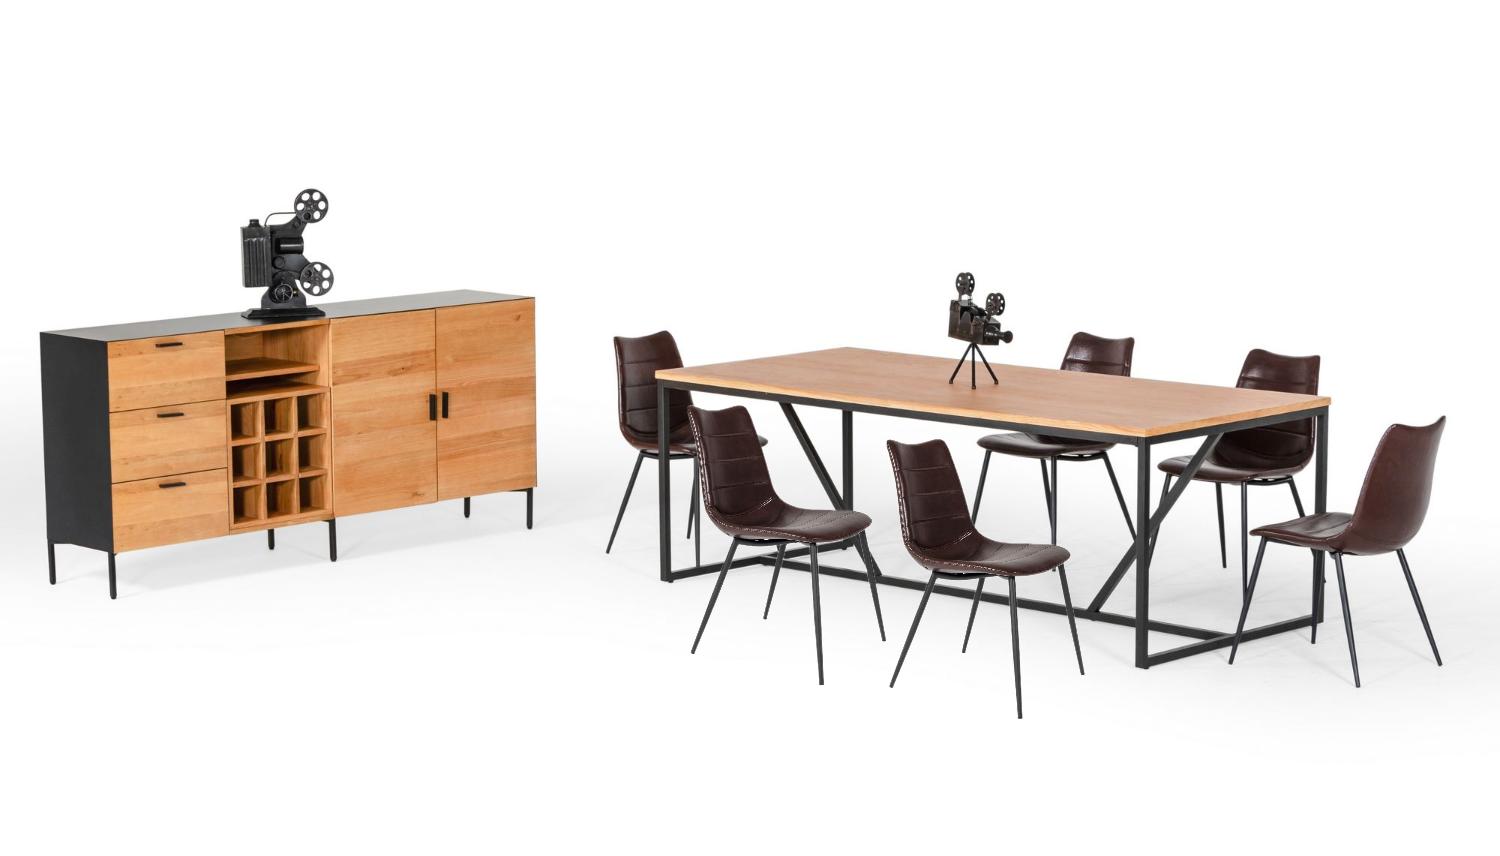 Contemporary, Modern Dining Room Set Fagan Gilliam VGEDMD220005-10pcs in Oak, Brown Leather